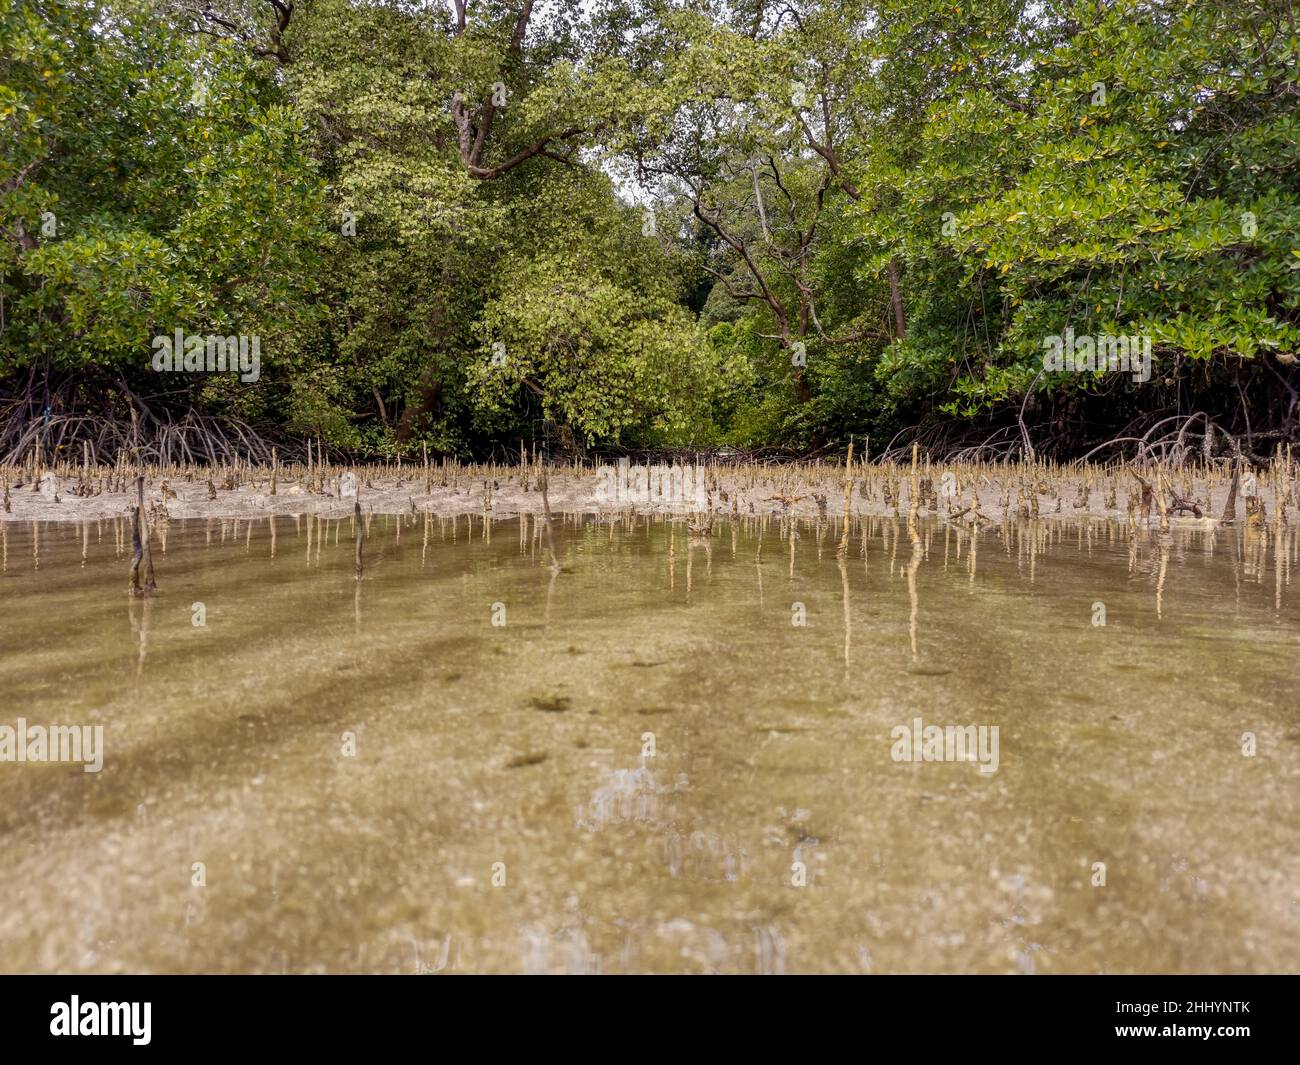 Low angle view of mangrove trees roots, pneumatophores, aerial roots. Tropical mangrove forest at low tide period. Shallow water reflection. Best natu Stock Photo